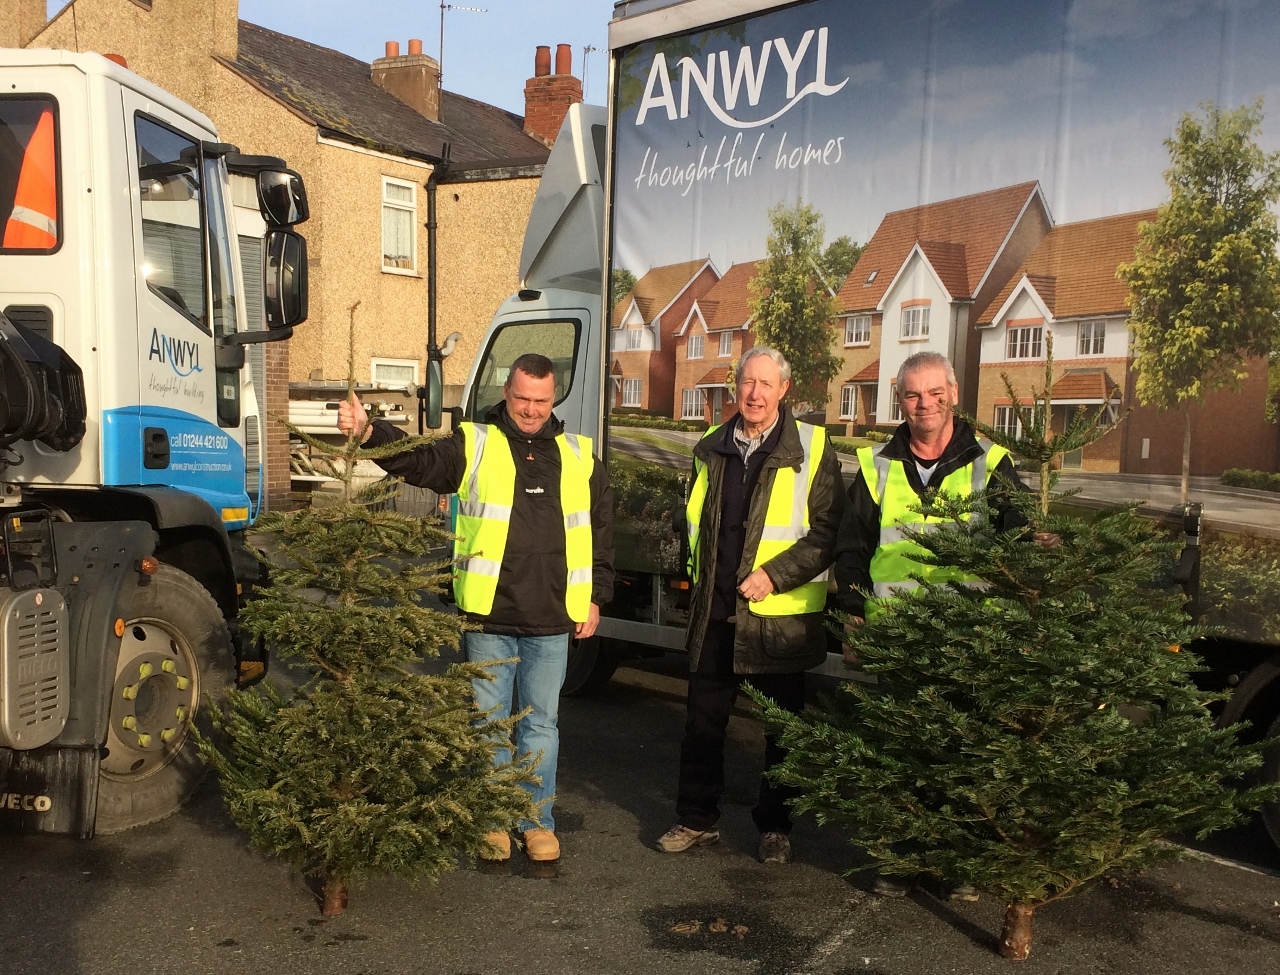 Builder helps charity raise £2.5K from Christmas tree collection